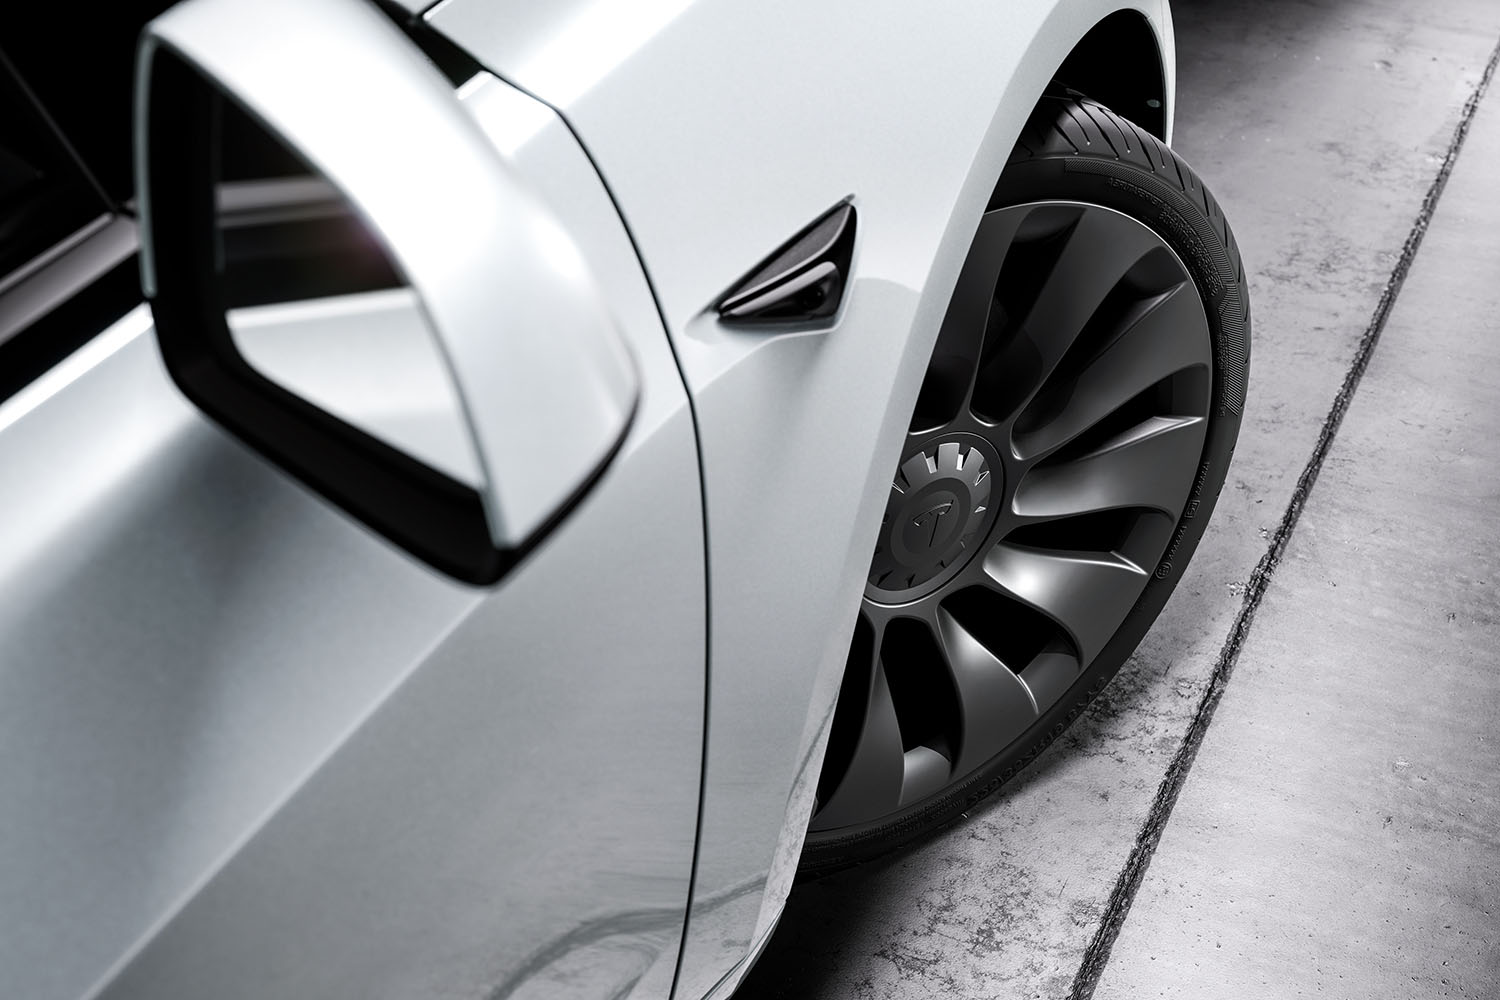 Close-up view of passenger-side white Tesla Model 3 tire and side-view mirror.